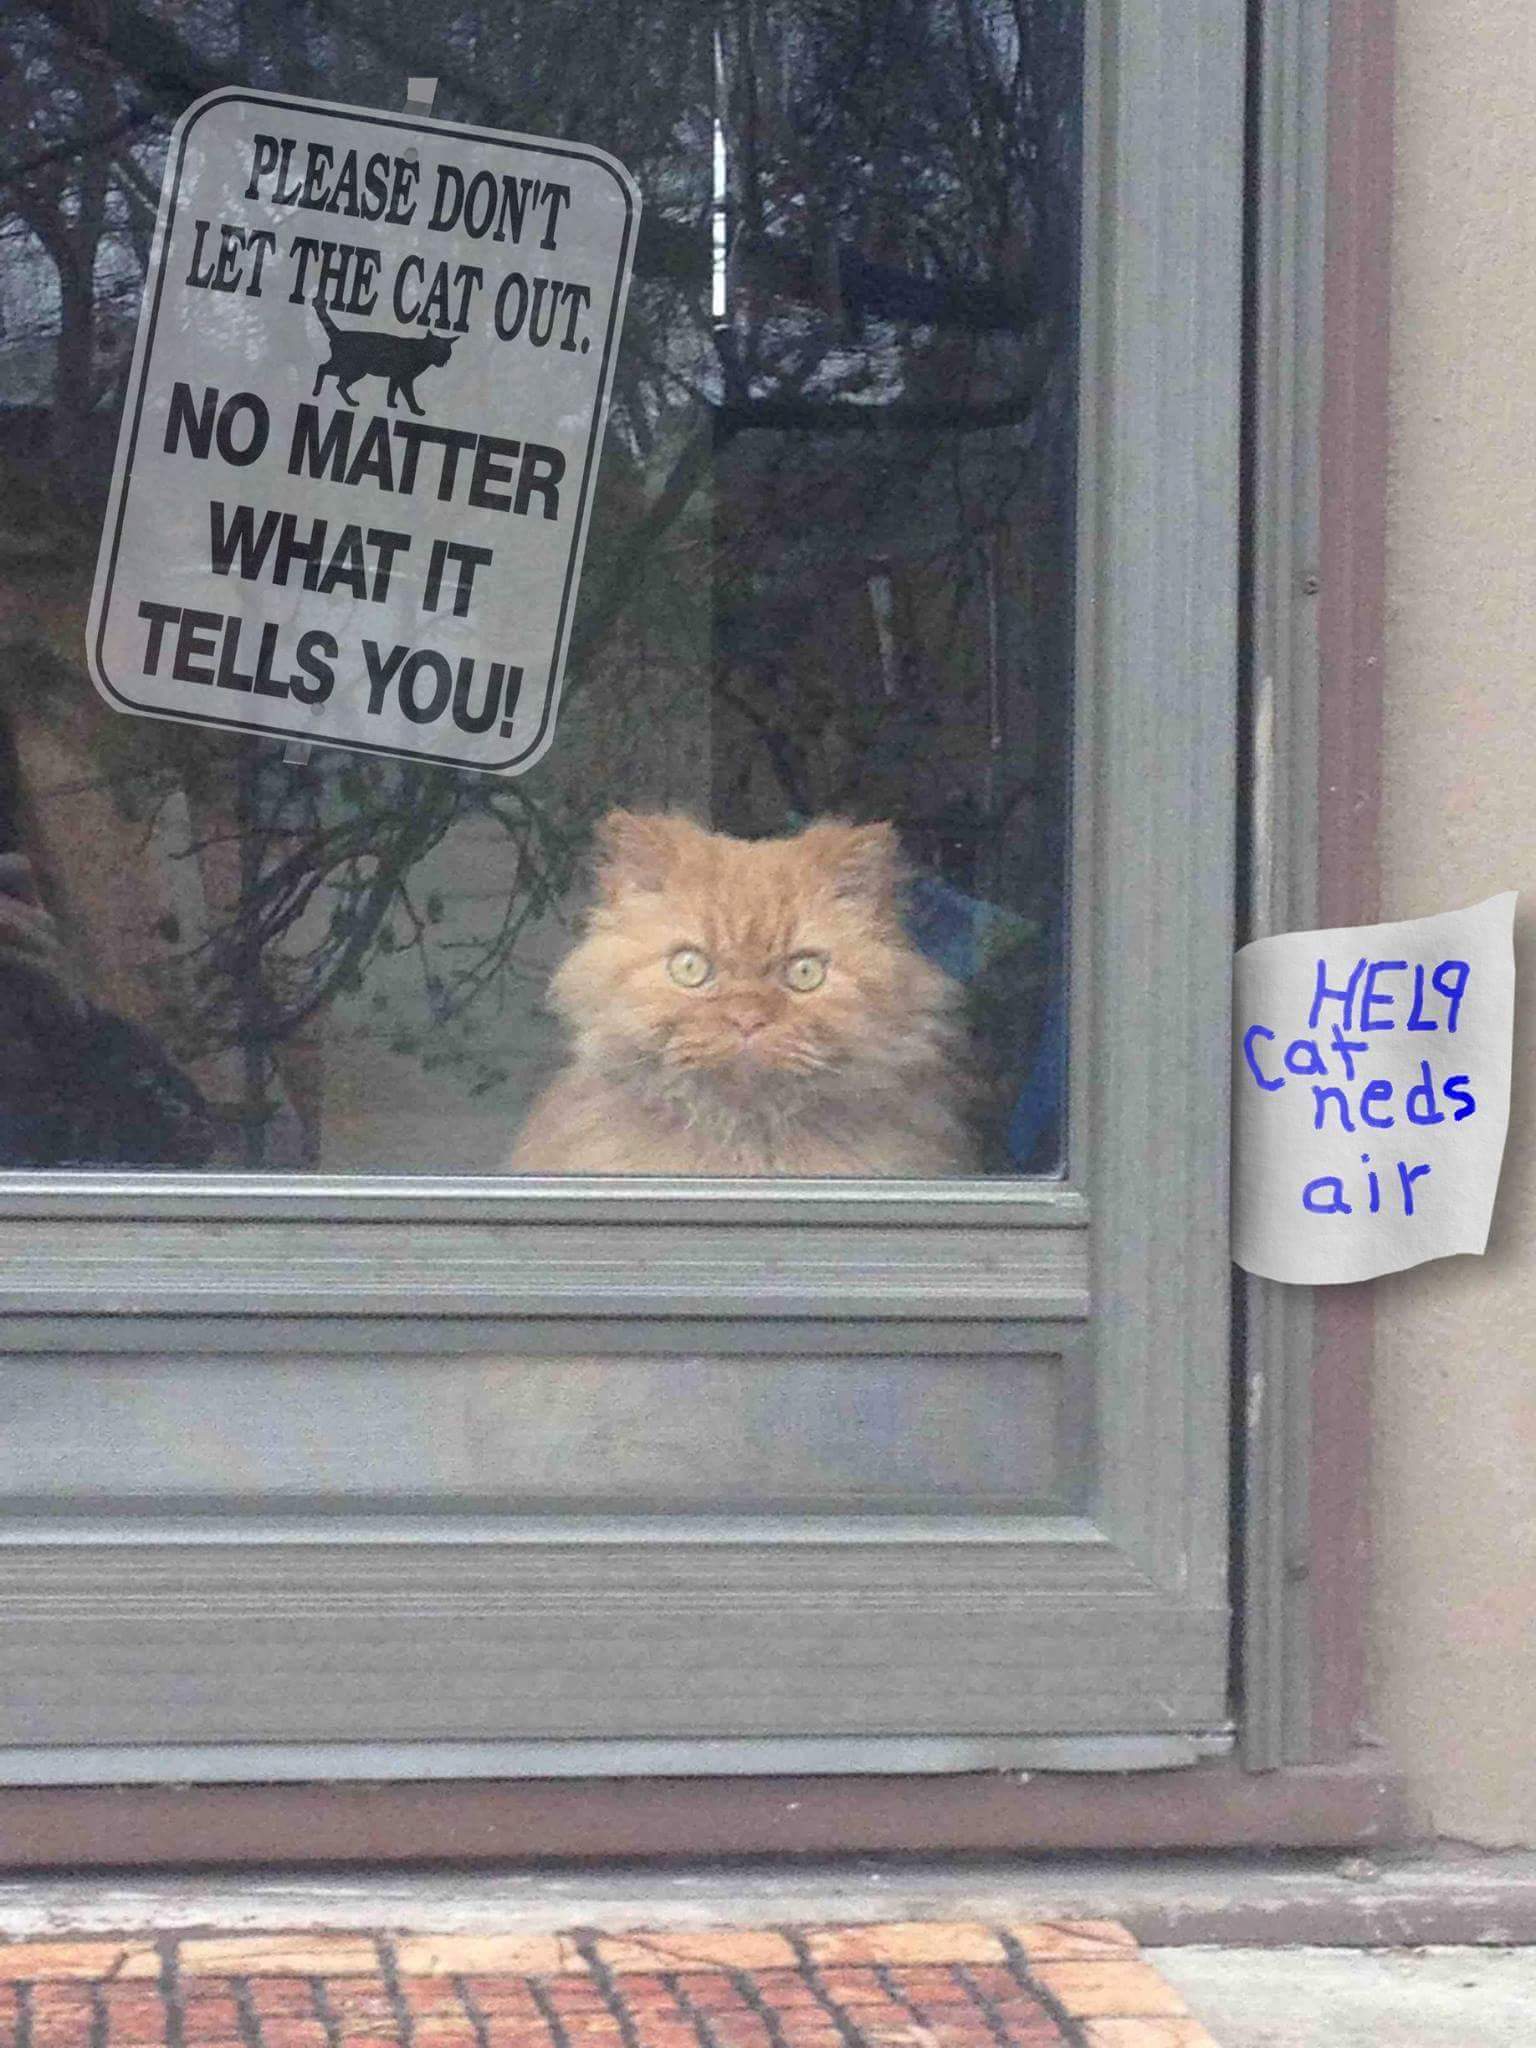 Please don’t let the cat out. No matter what it tells you!